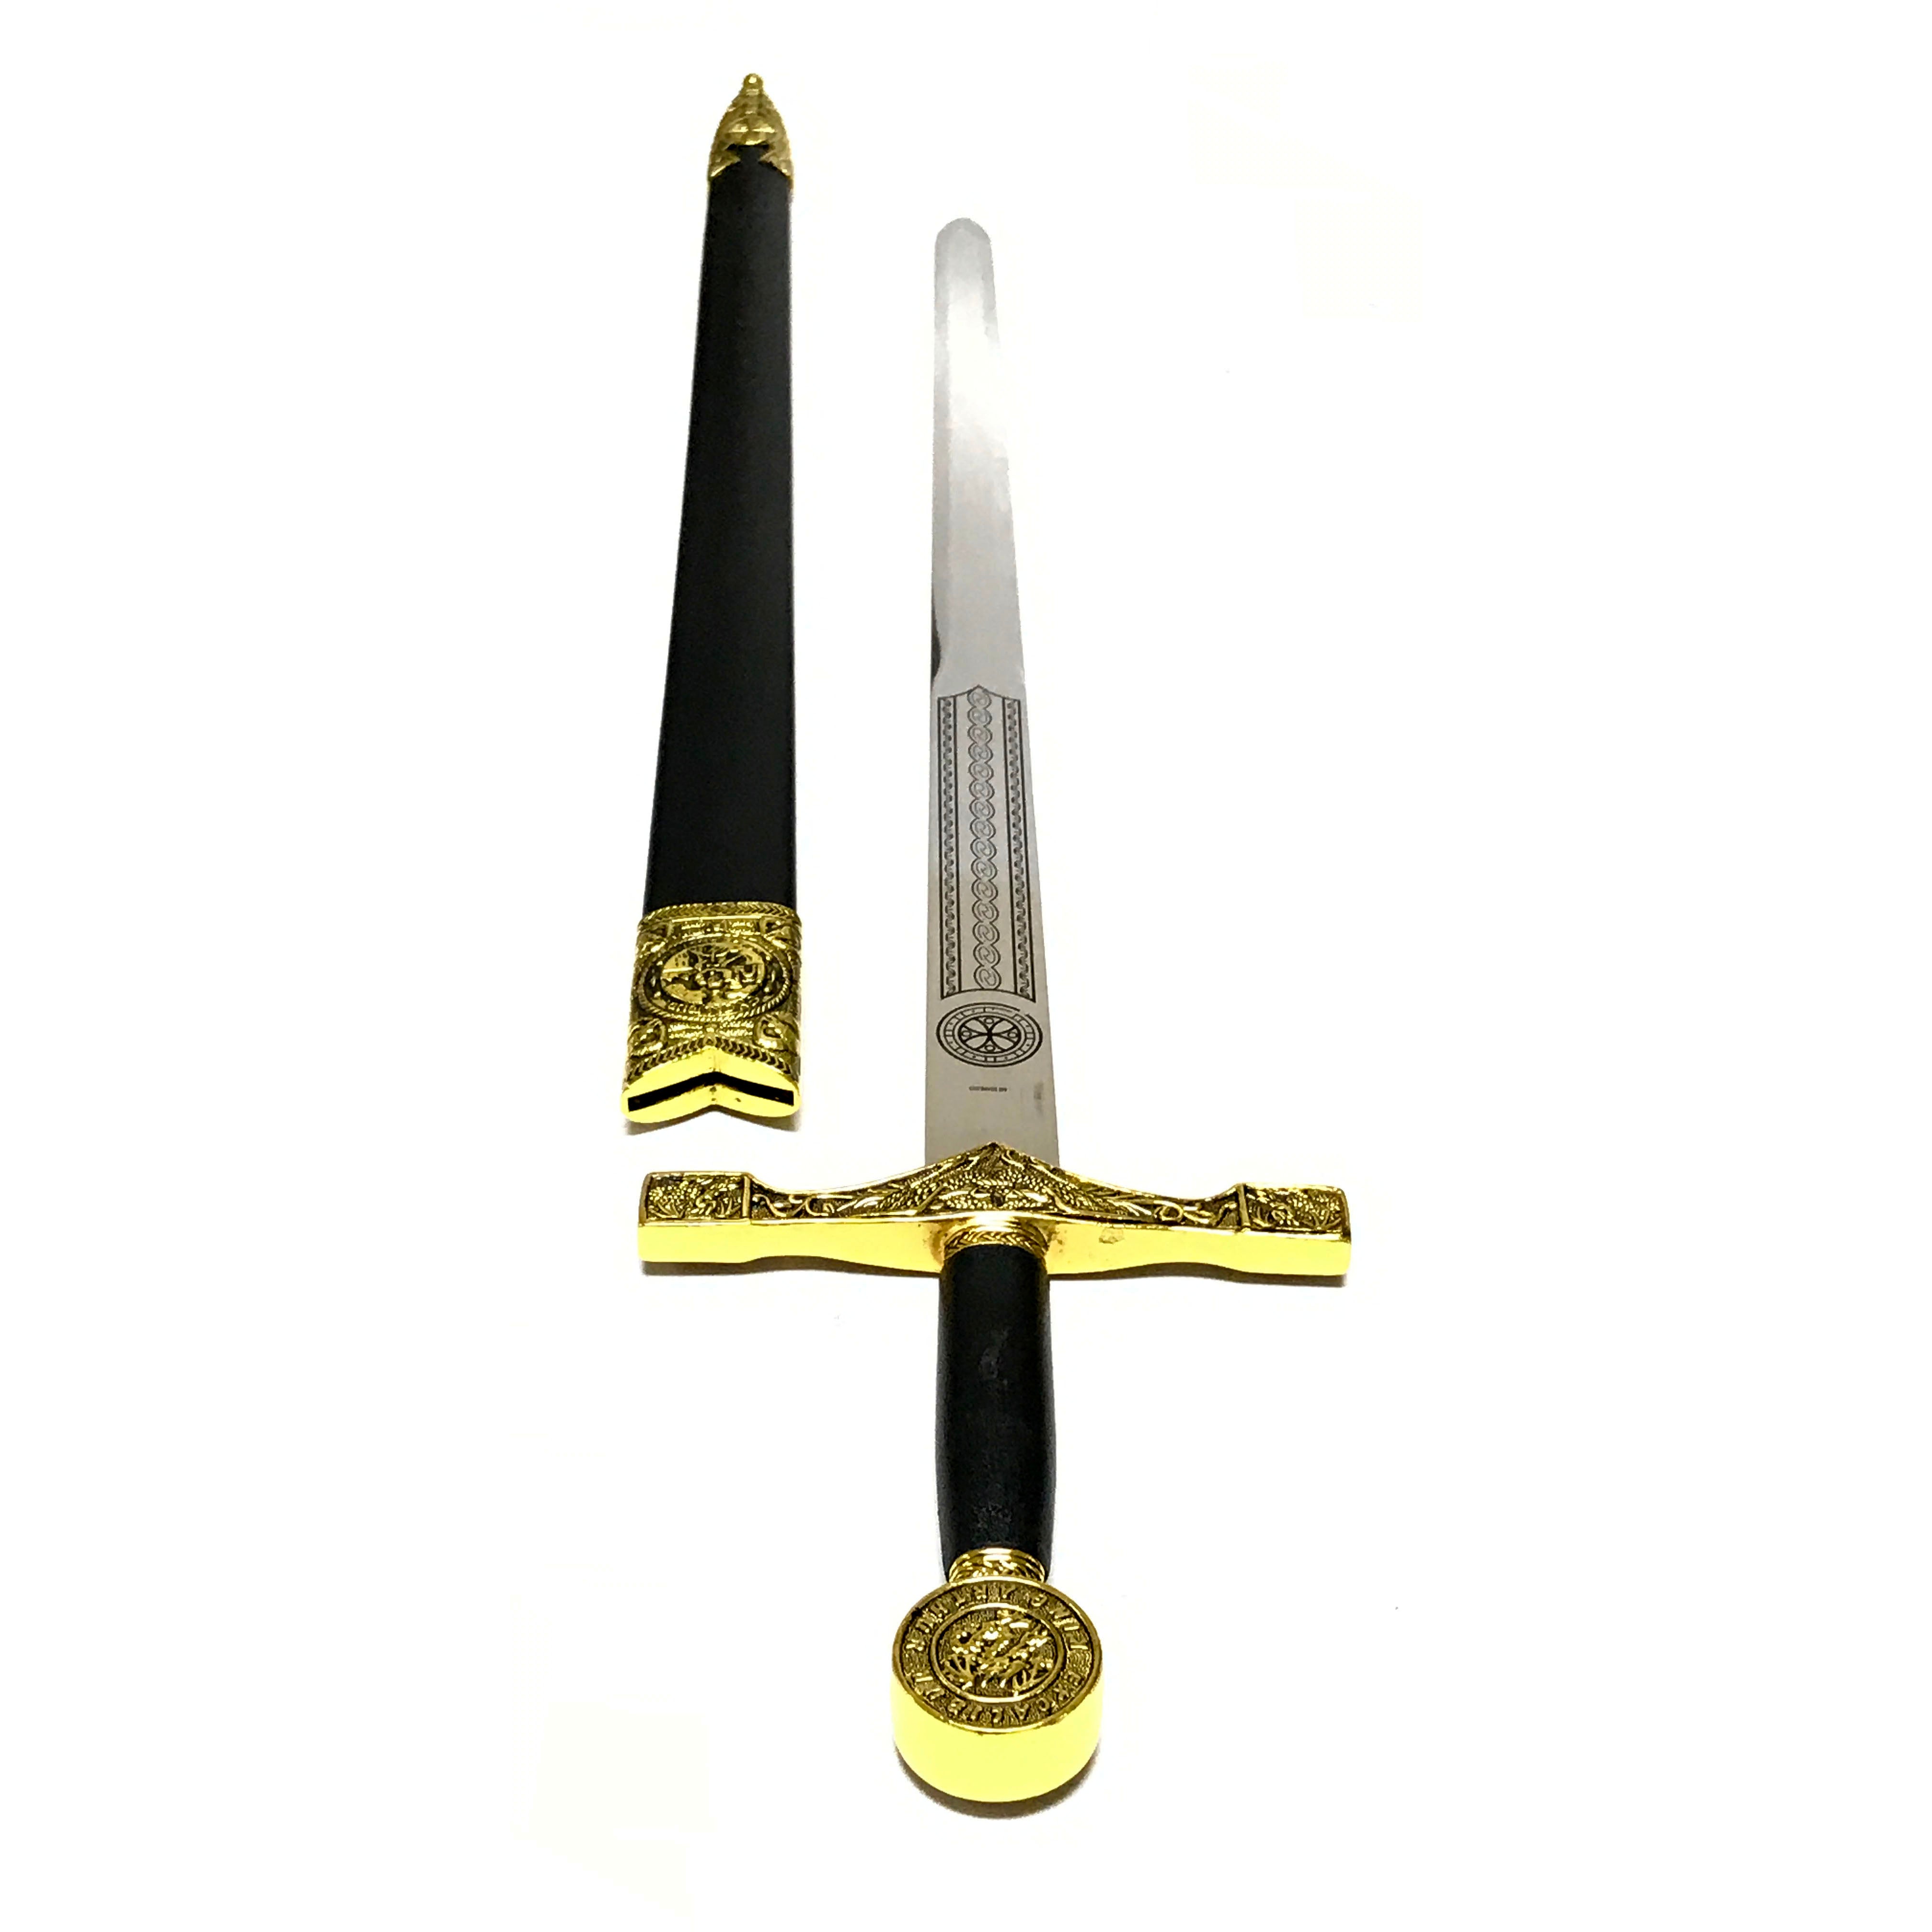 Gold and Silver King Arthur Knight's of the Round Table Excalibur Metal Replica Sword with Scabbard